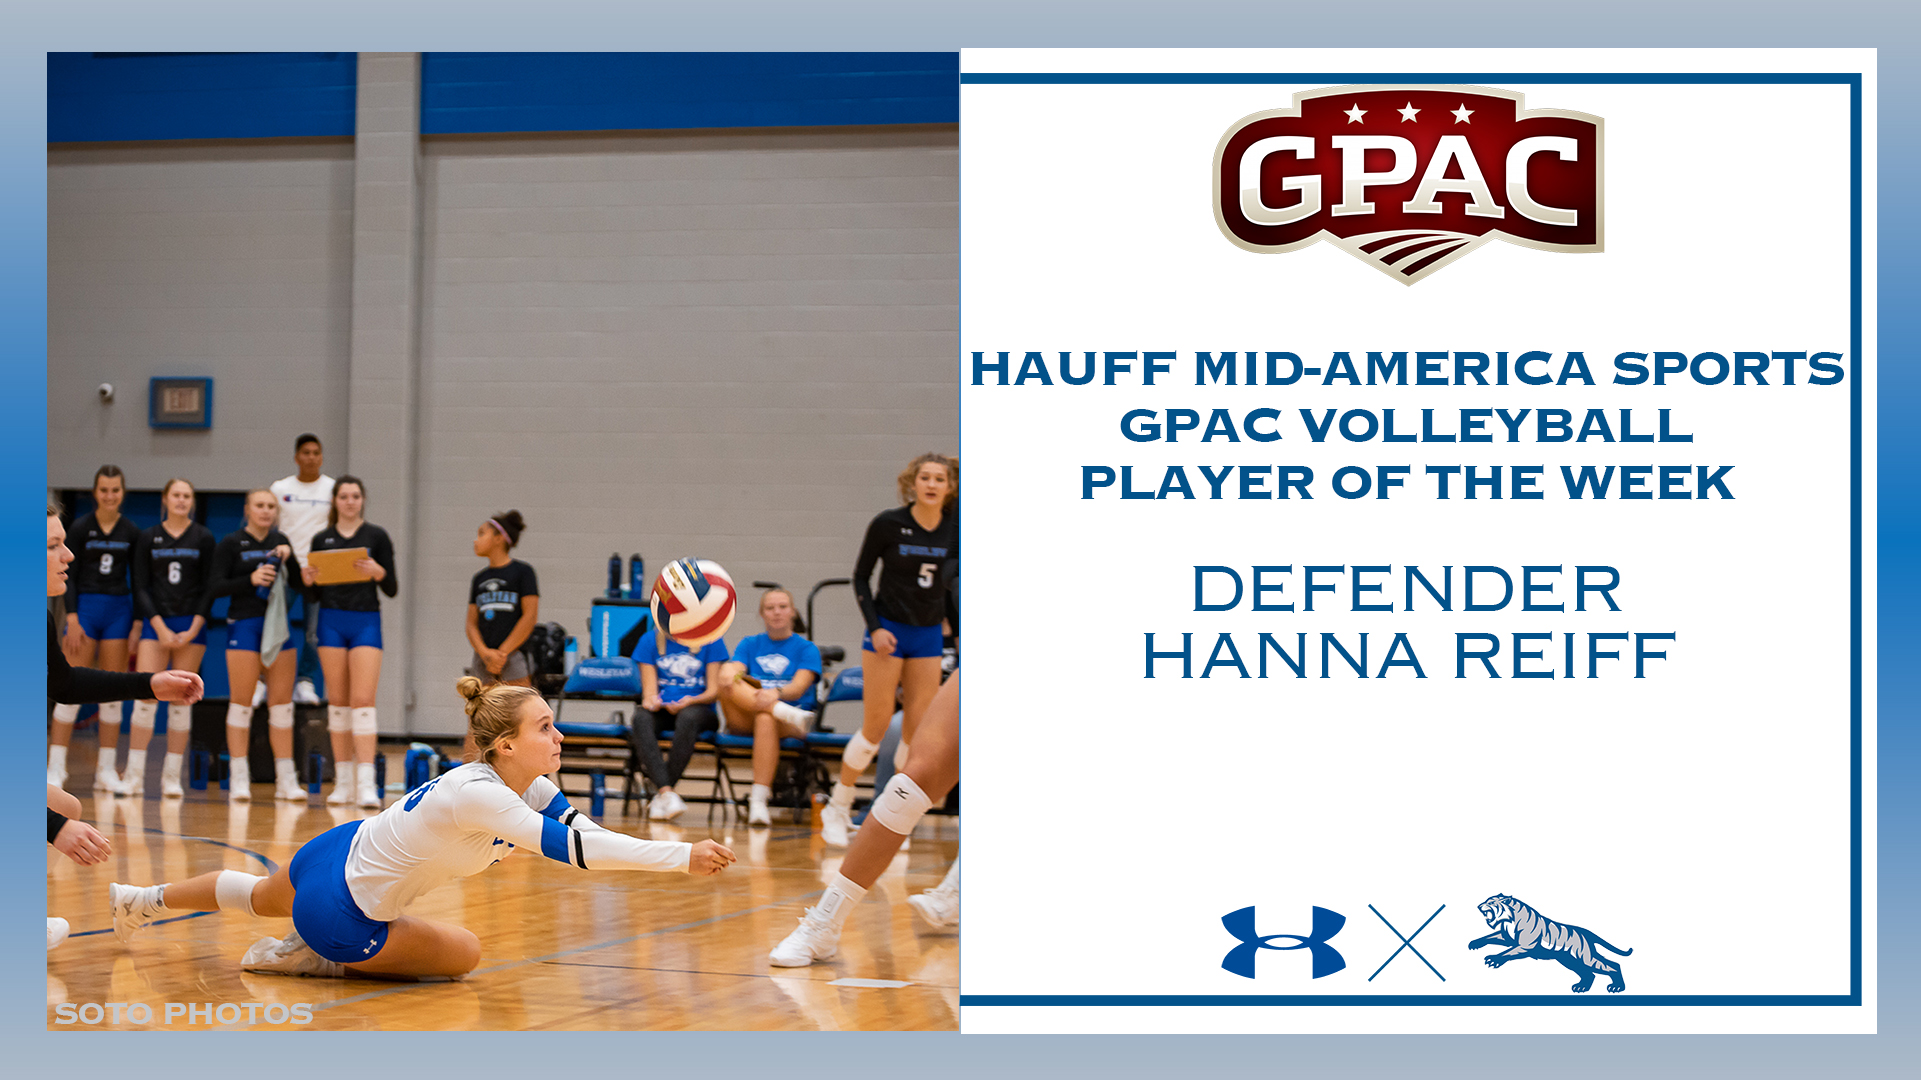 HANNA REIFF TABBED AS GPAC VOLLEYBALL DEFENDER OF THE WEEK